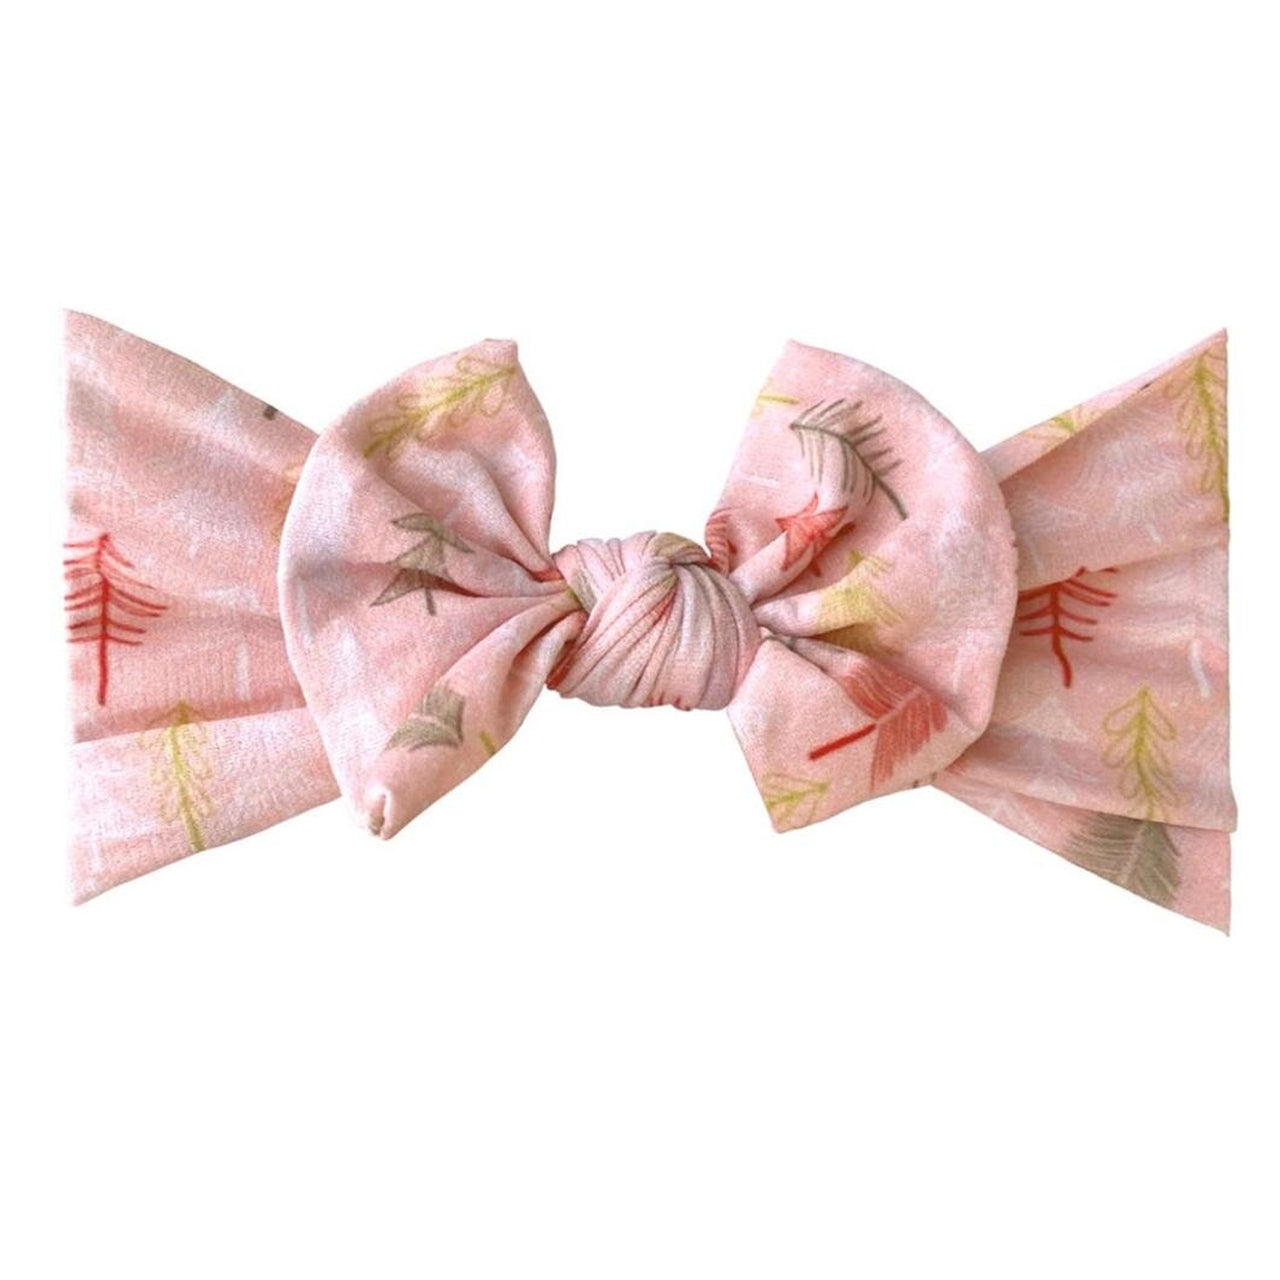 SpearmintLOVE’s baby Classic Knot Bow, Holiday Trees